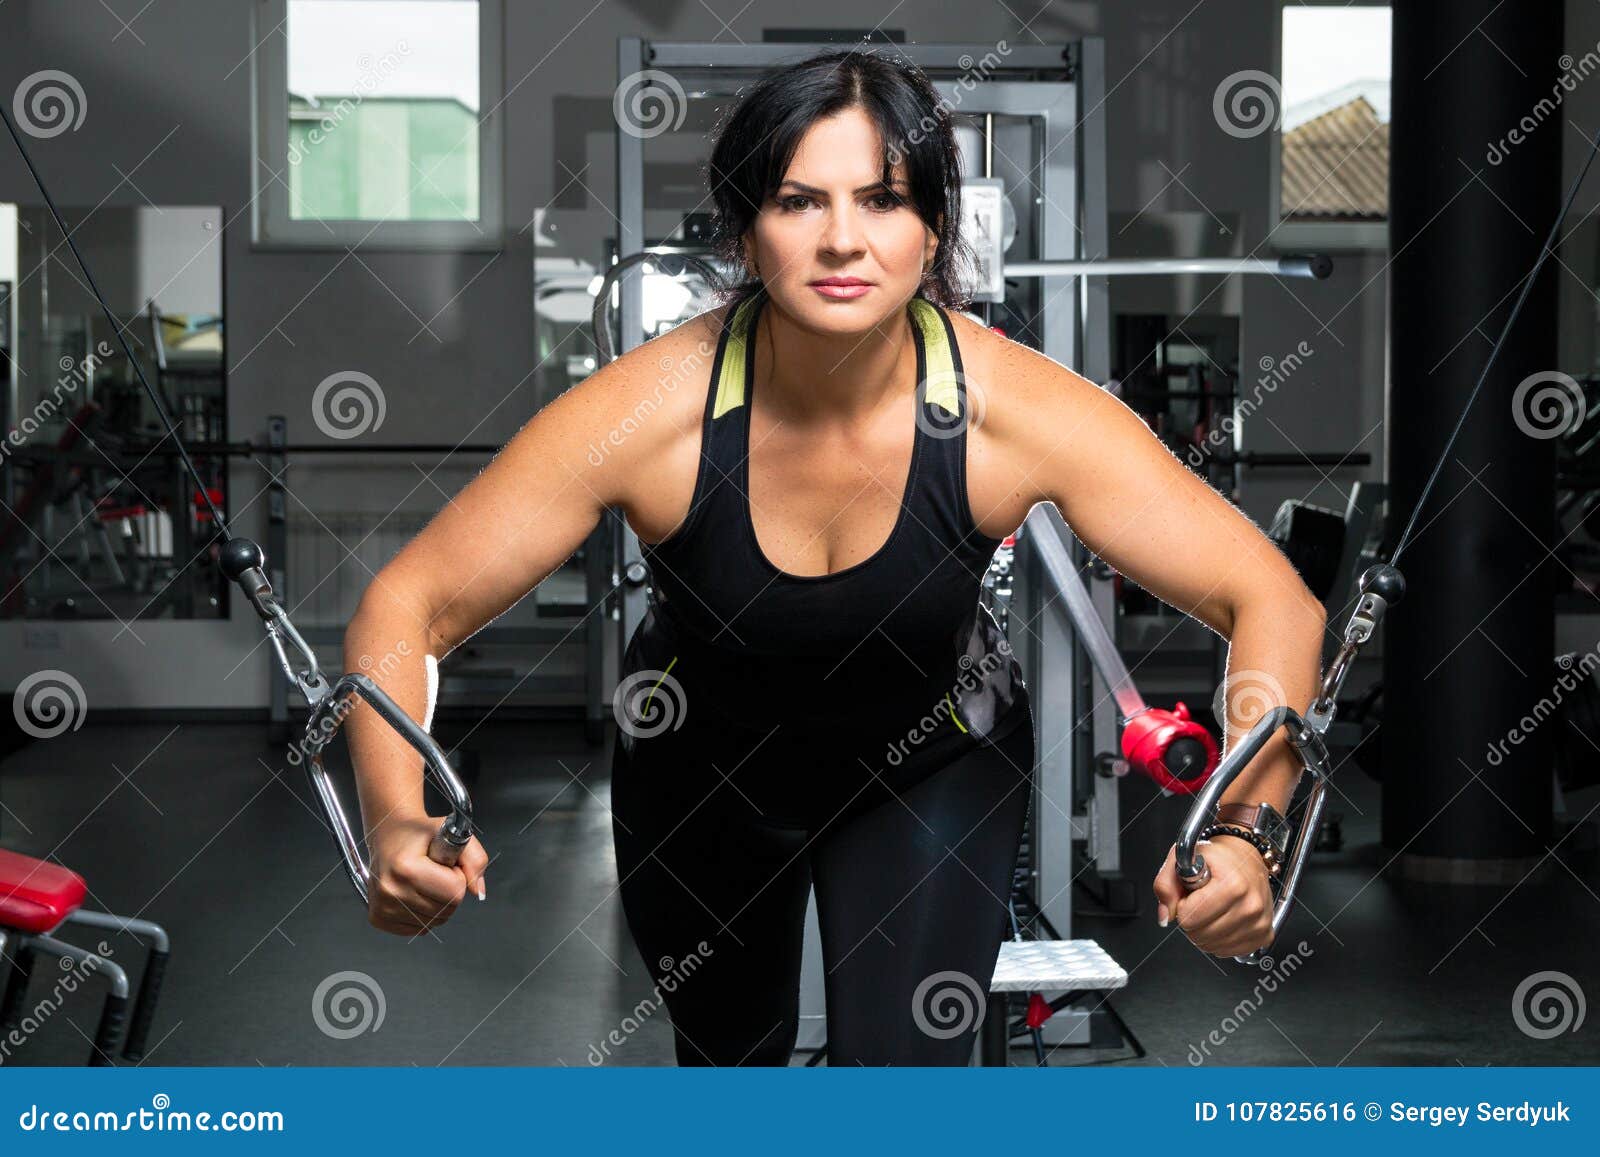 Woman Plus Size in Gym Doing Exercises with Training Apparatus